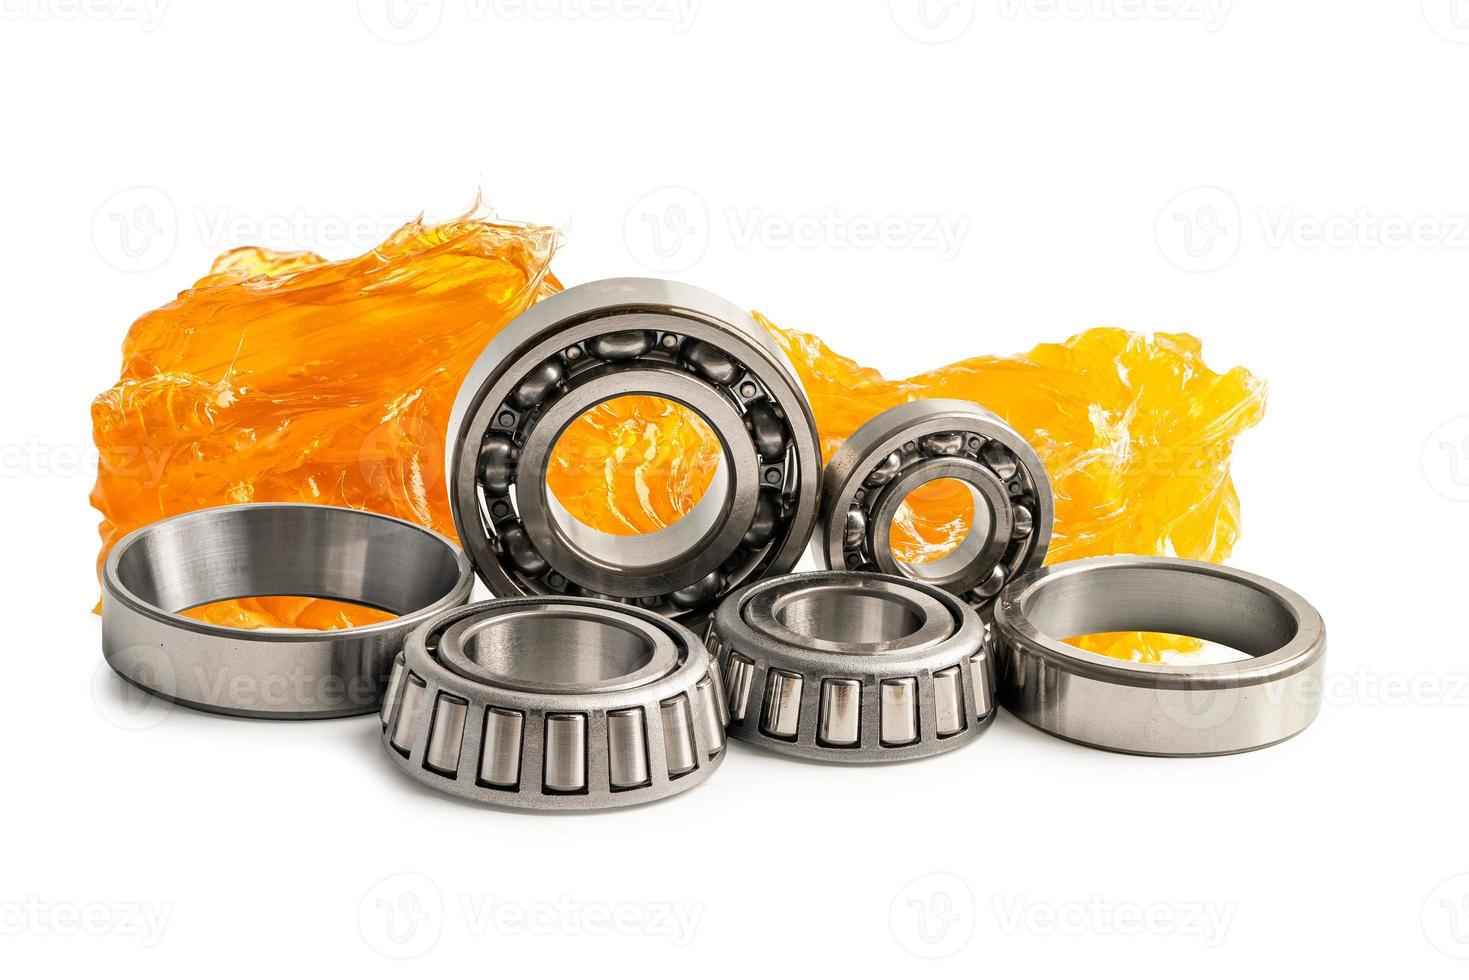 Ball bearing stainless with grease lithium machinery lubrication for automotive and industrial  isolated on white background photo